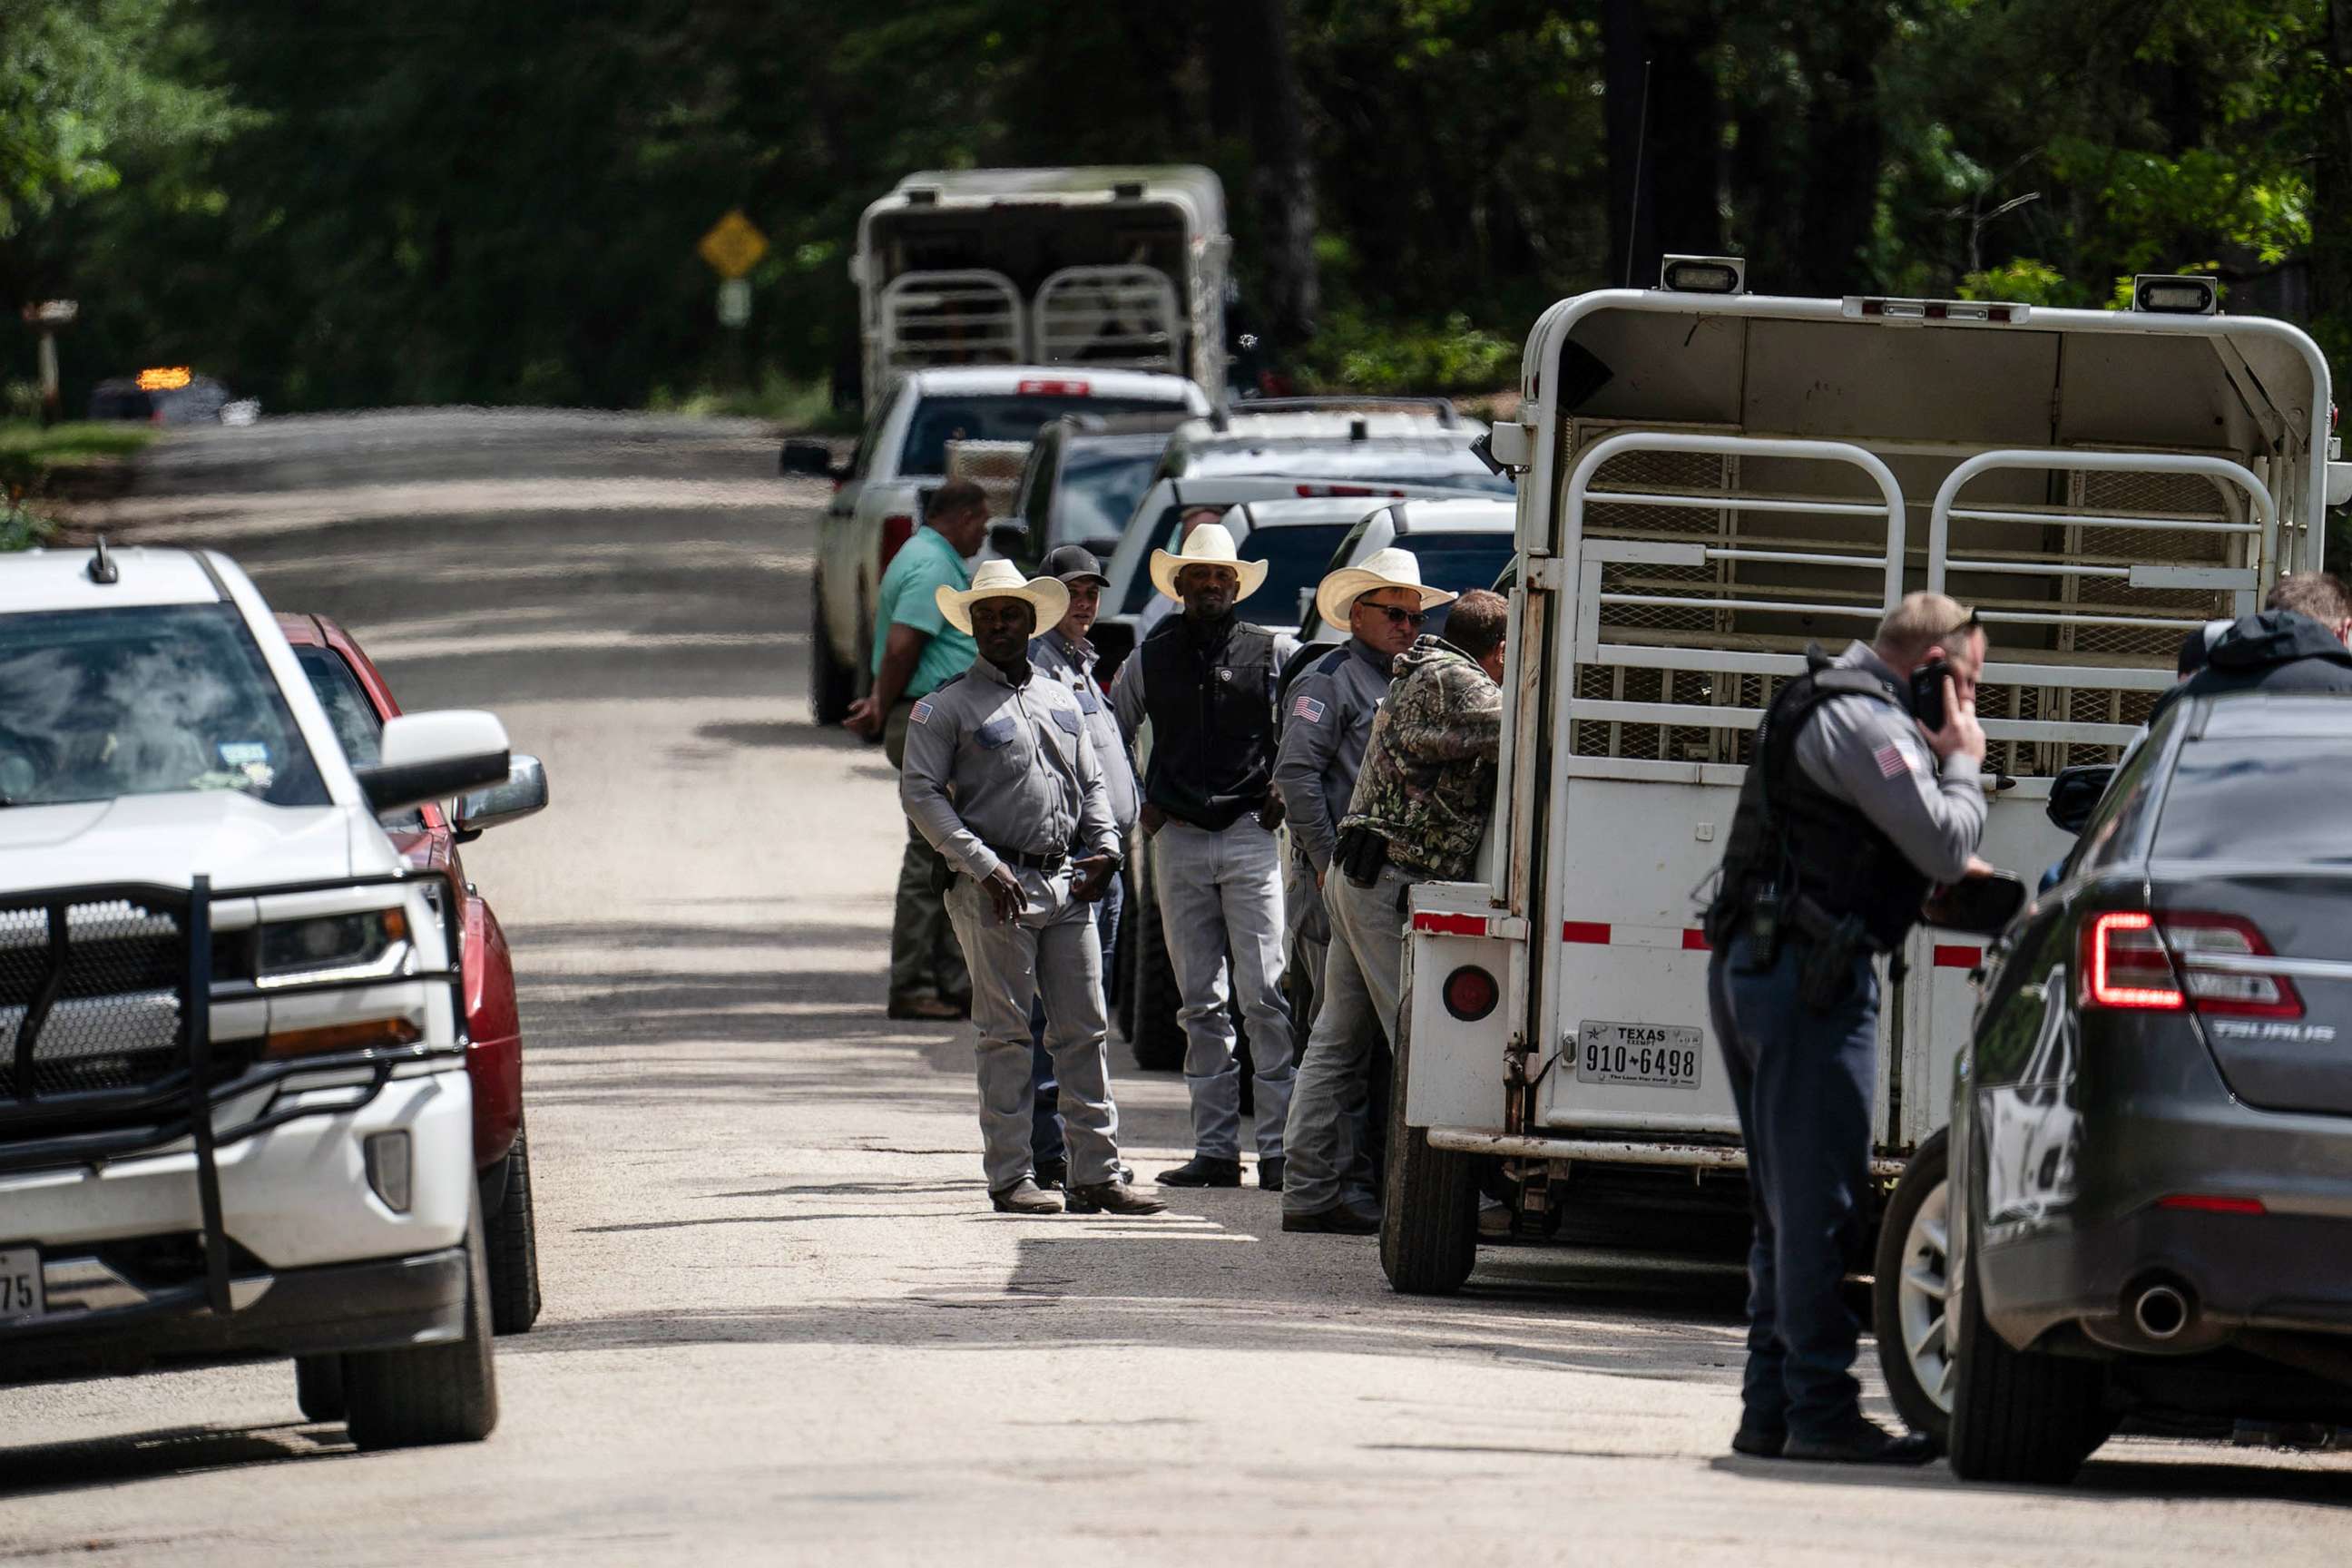 PHOTO: Law enforcement search for the suspect a few miles from the scene where five people, including an 8-year-old child, were killed after a shooting inside a home, April 29, 2023 in Cleveland, Texas.